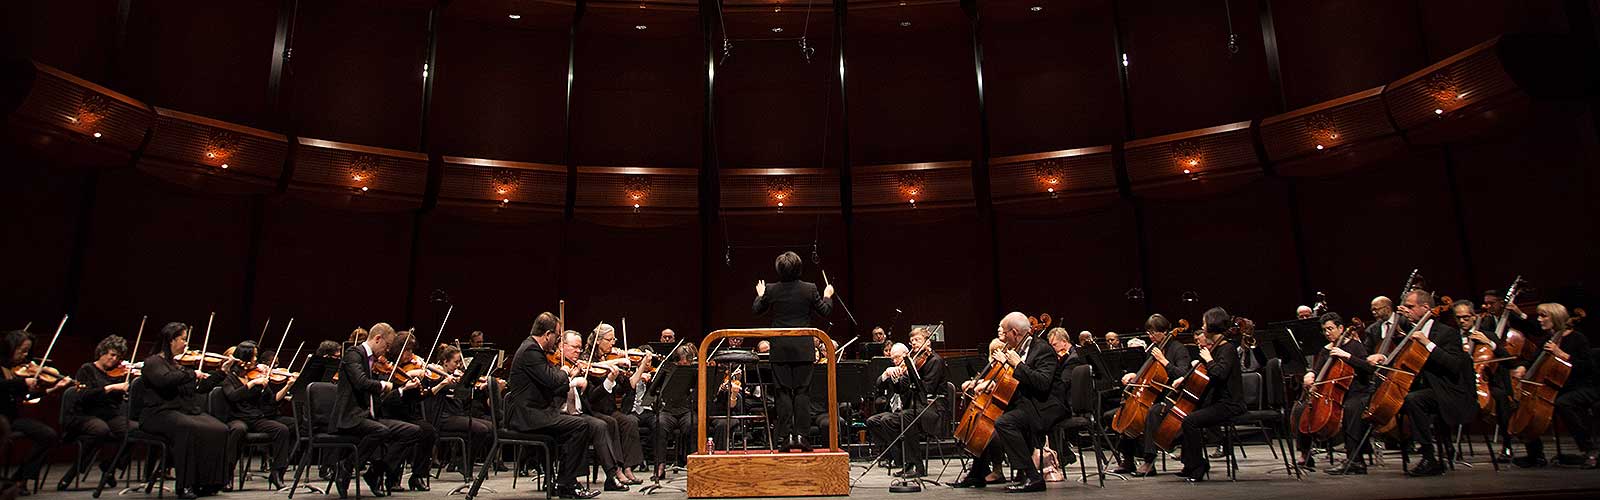 About The Njso New Jersey Symphony Orchestra